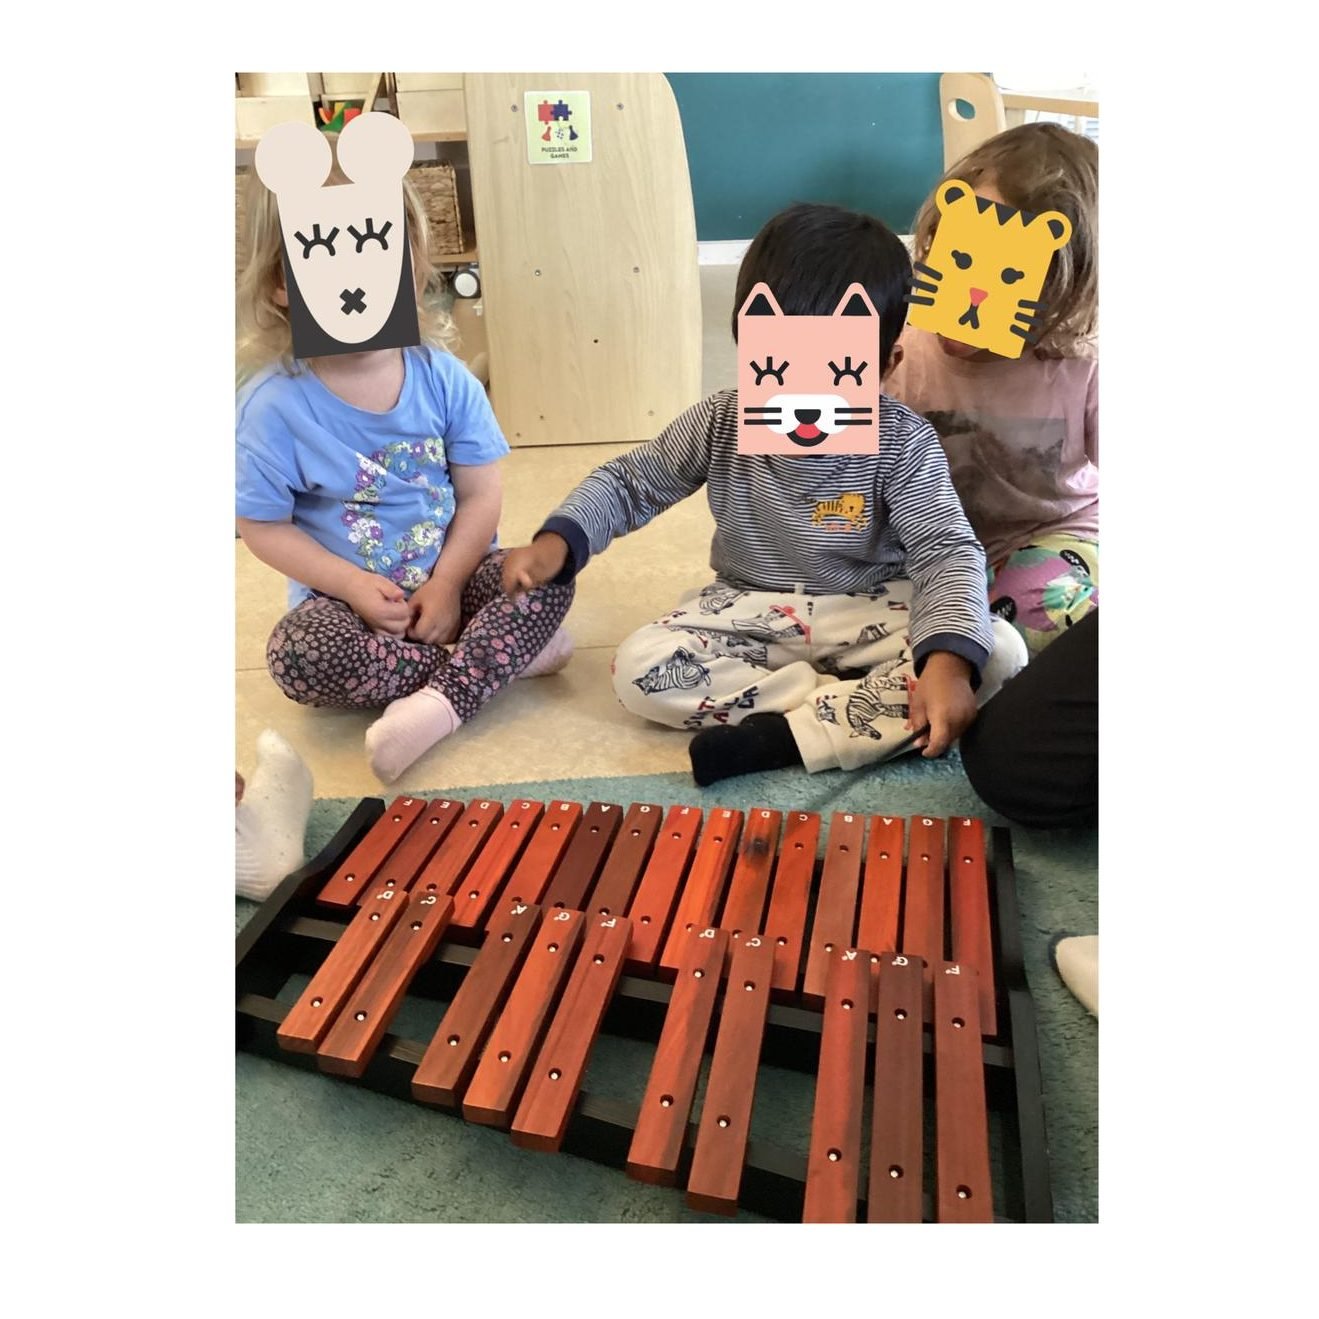 Lively Learners and Tiny-Explorers had a blast discovering new musical instruments! Last week, they got hands-on with new xylophone and djembe, playing along to a tune taught by our music teacher. It was a joy to watch them engage and enjoy the music